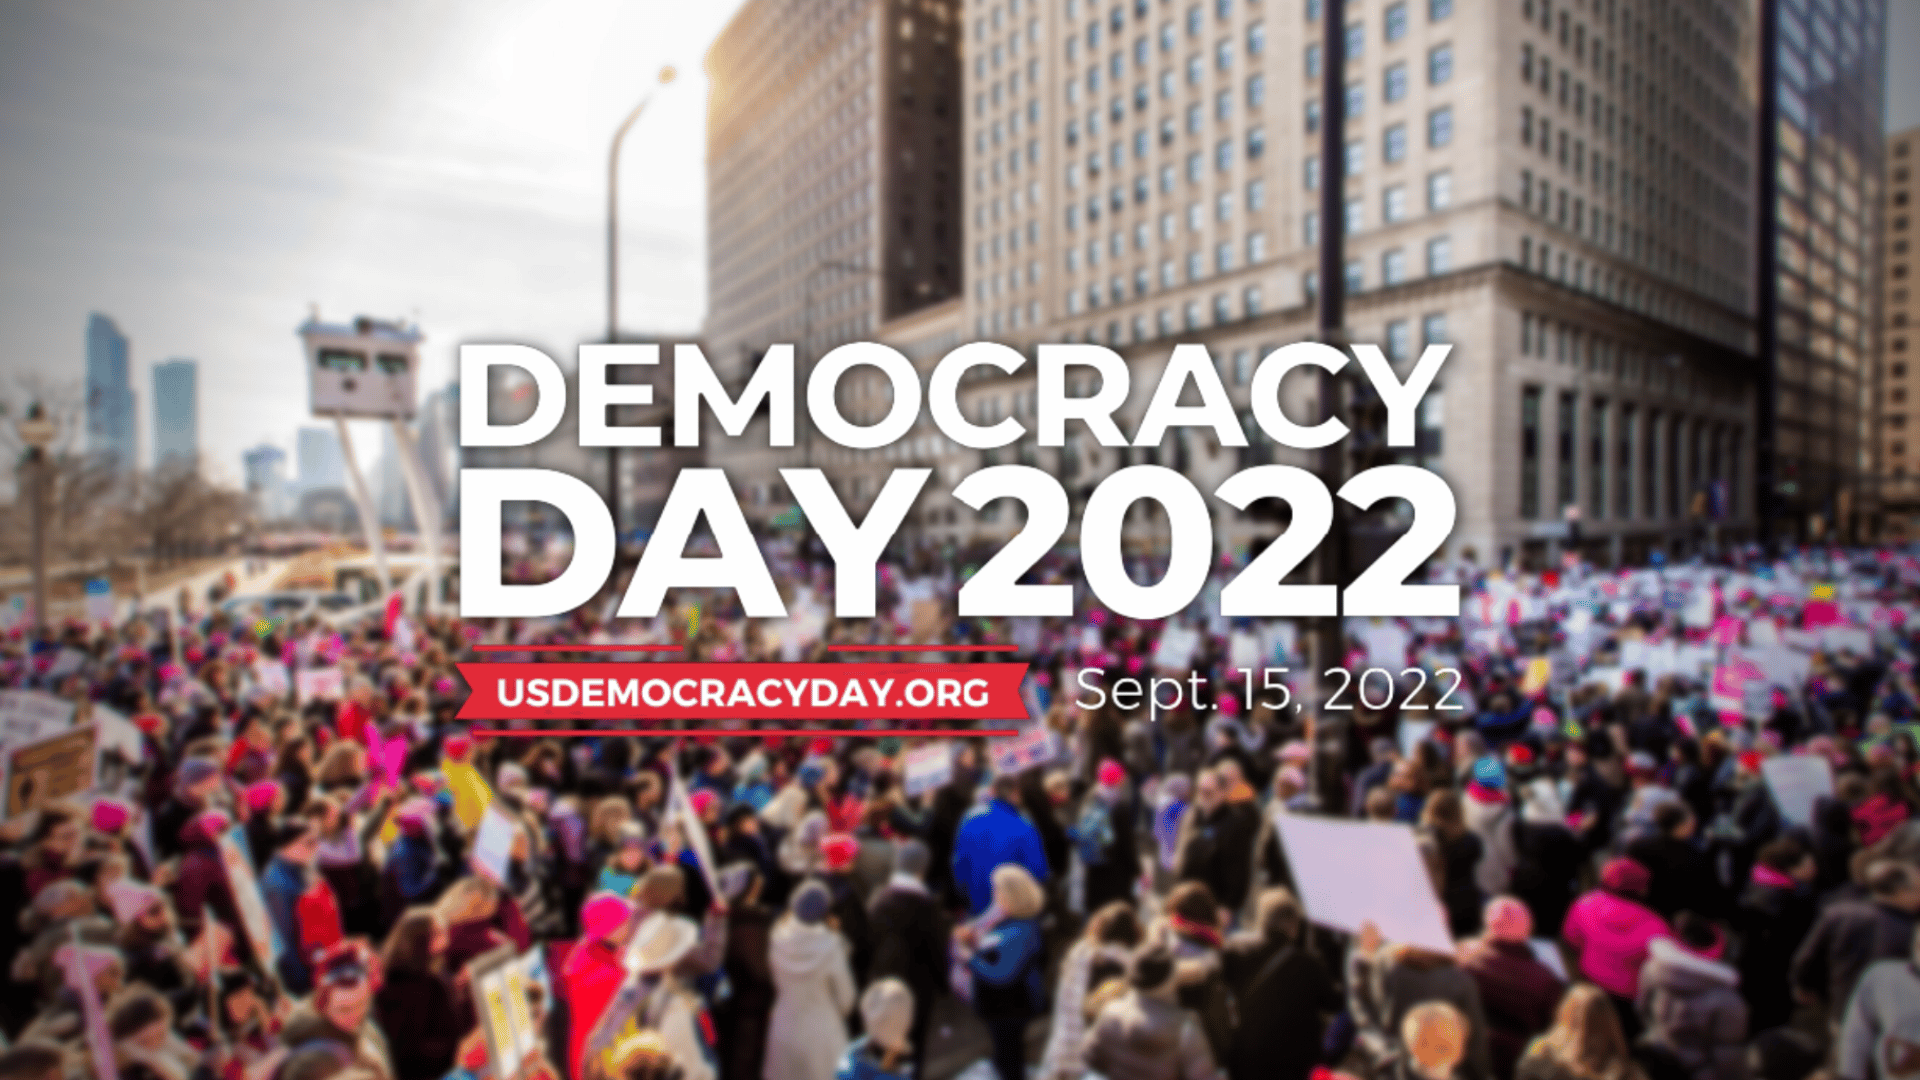 A crowd of demonstrators gathers in the streets in the background of the image, with the Democracy Day 2022 logo in the foreground.